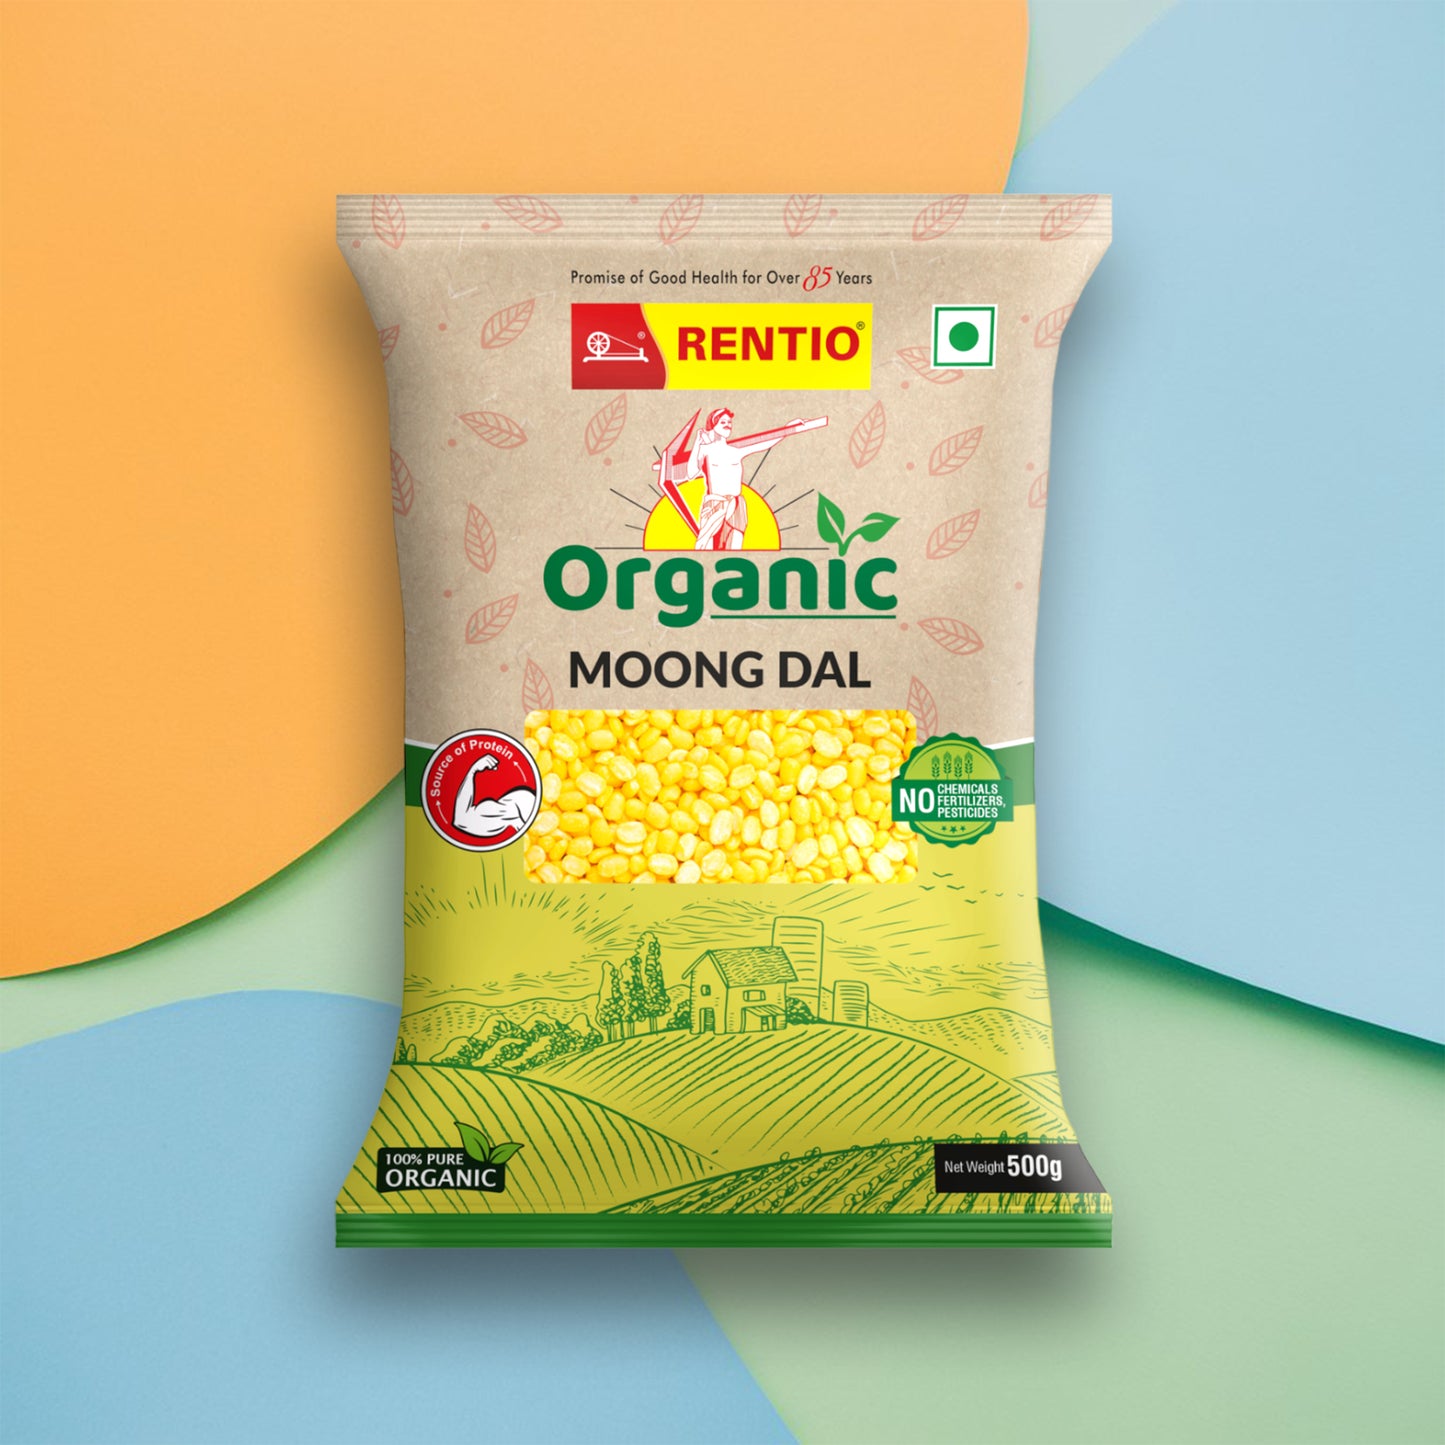 RENTIO Organic Yellow Moong Dal 1kg - Pack of 2 (500gms each)